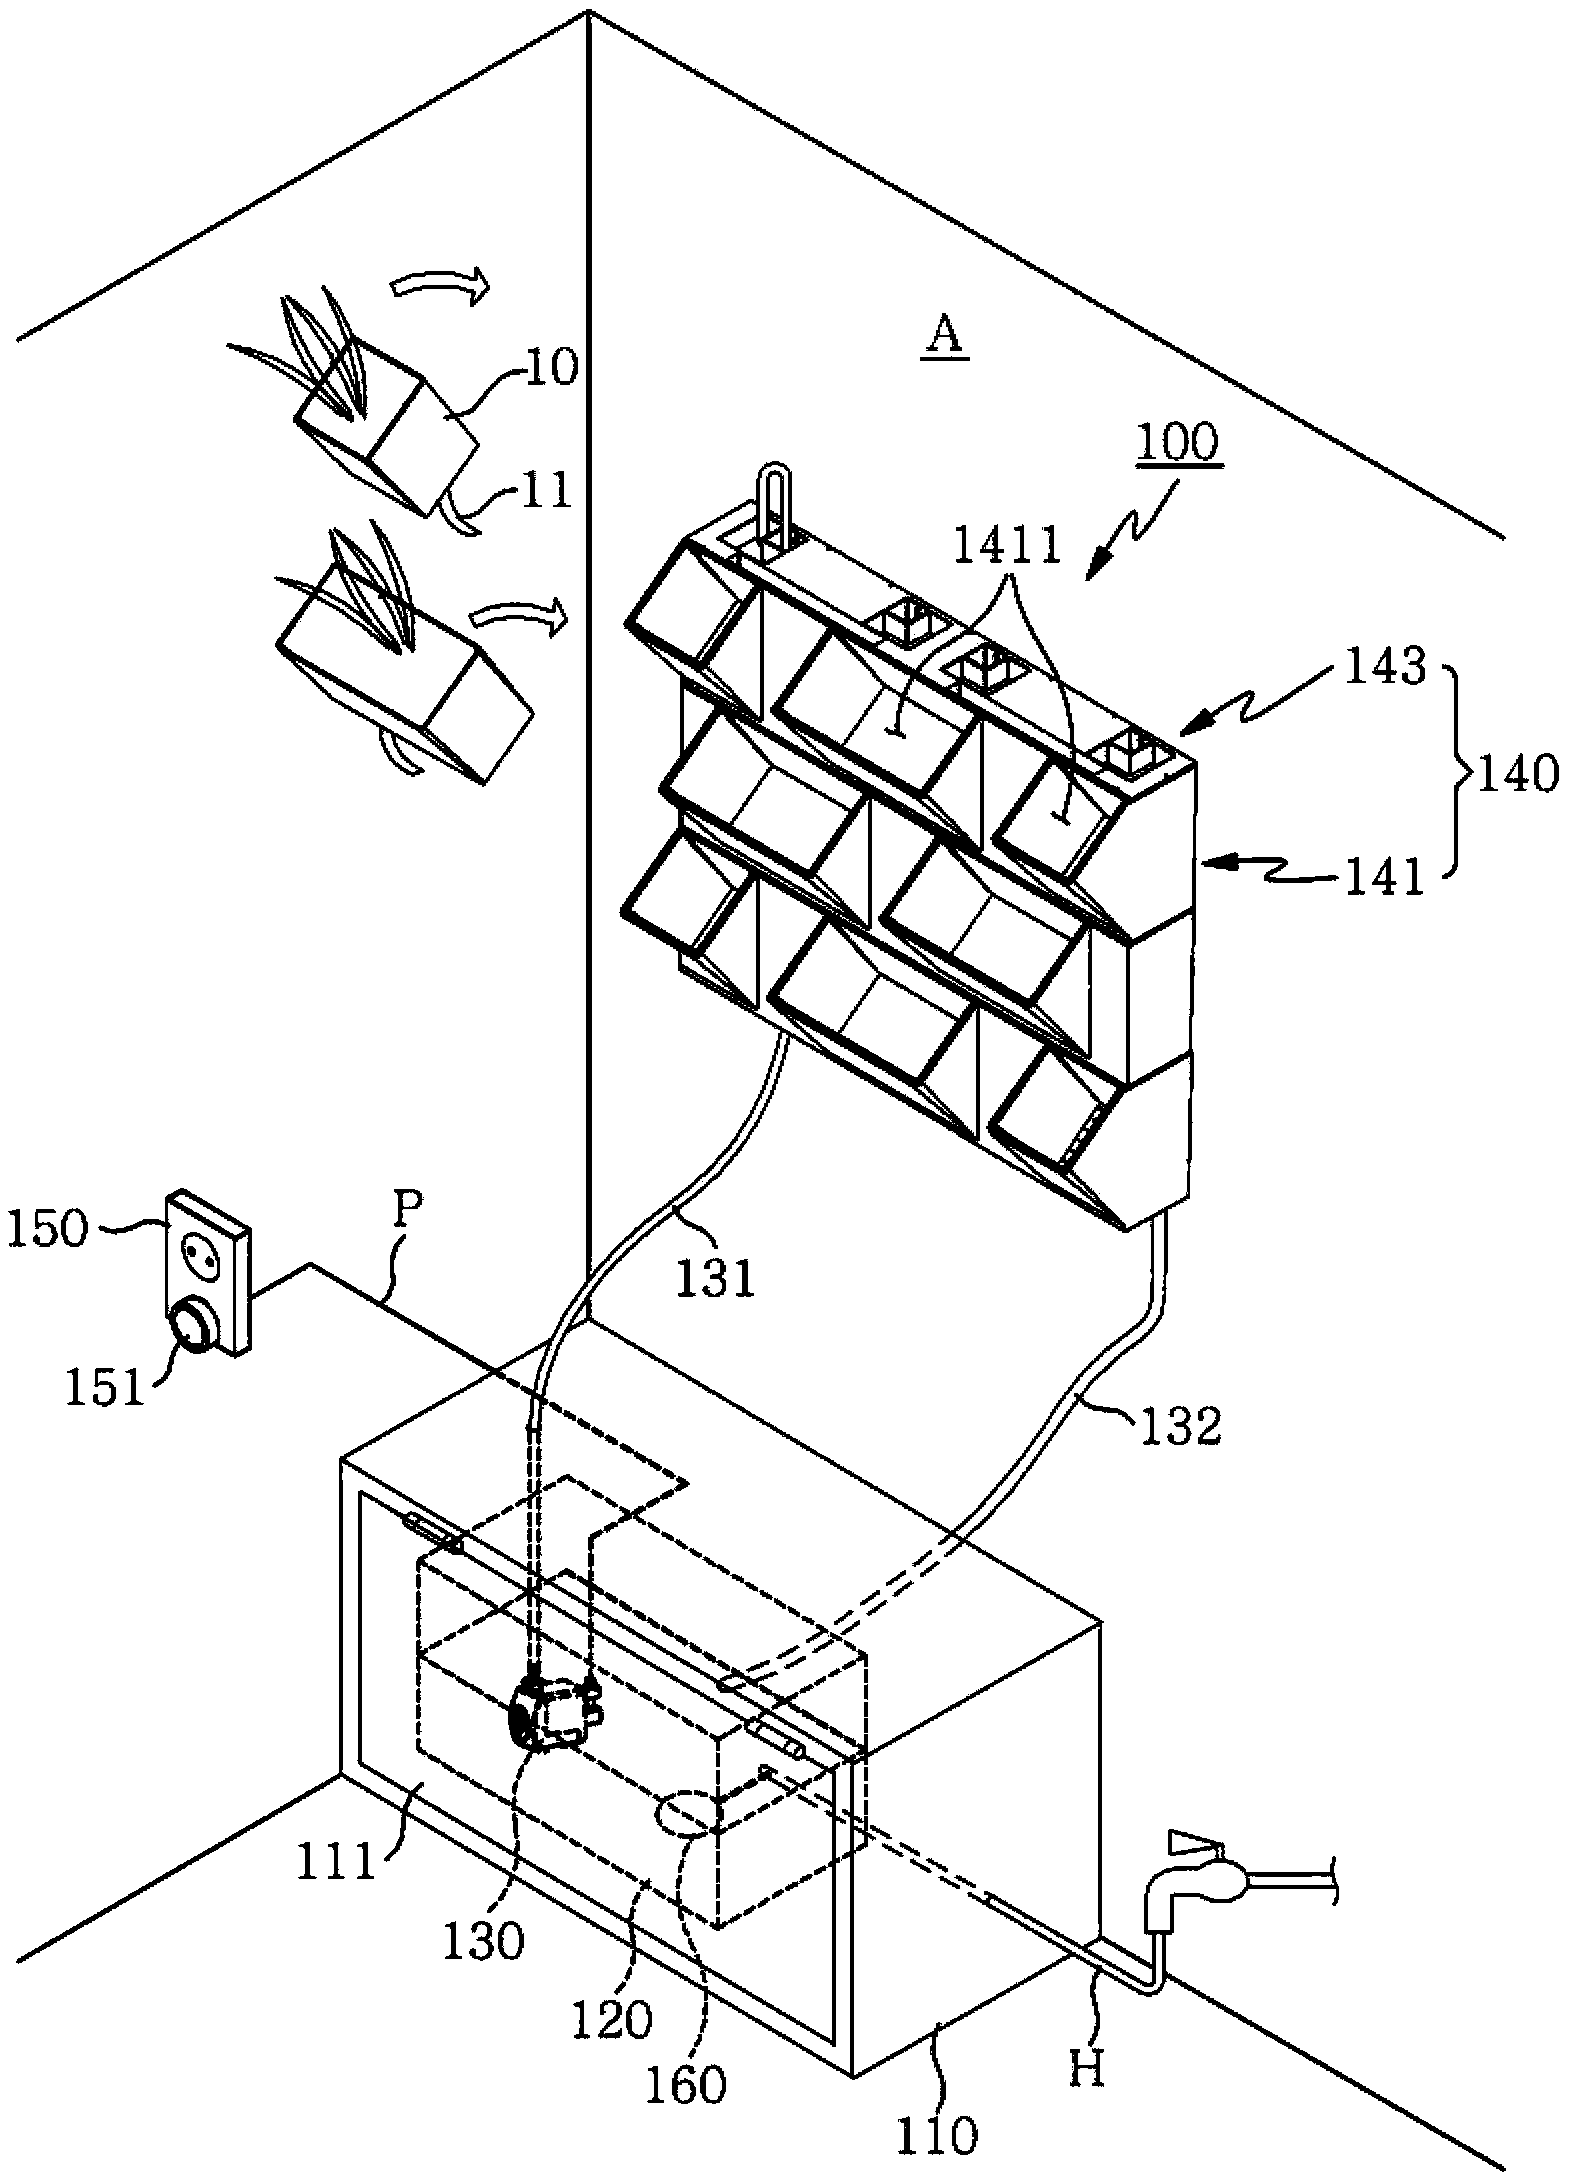 Plant cultivation apparatus fixed to wall